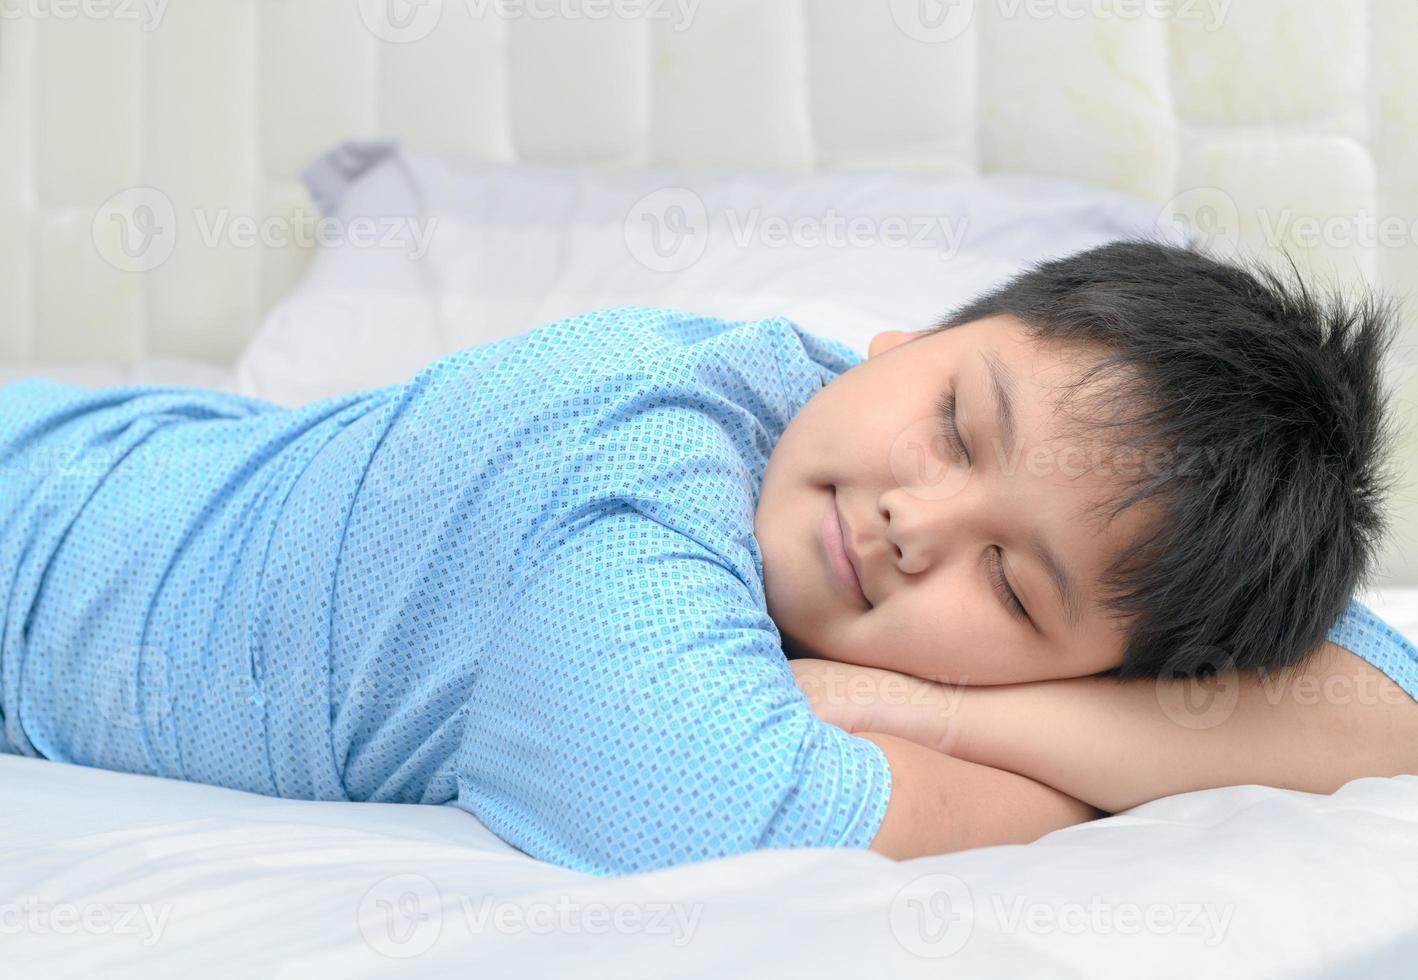 Obese fat boy sweet dream on his arm photo